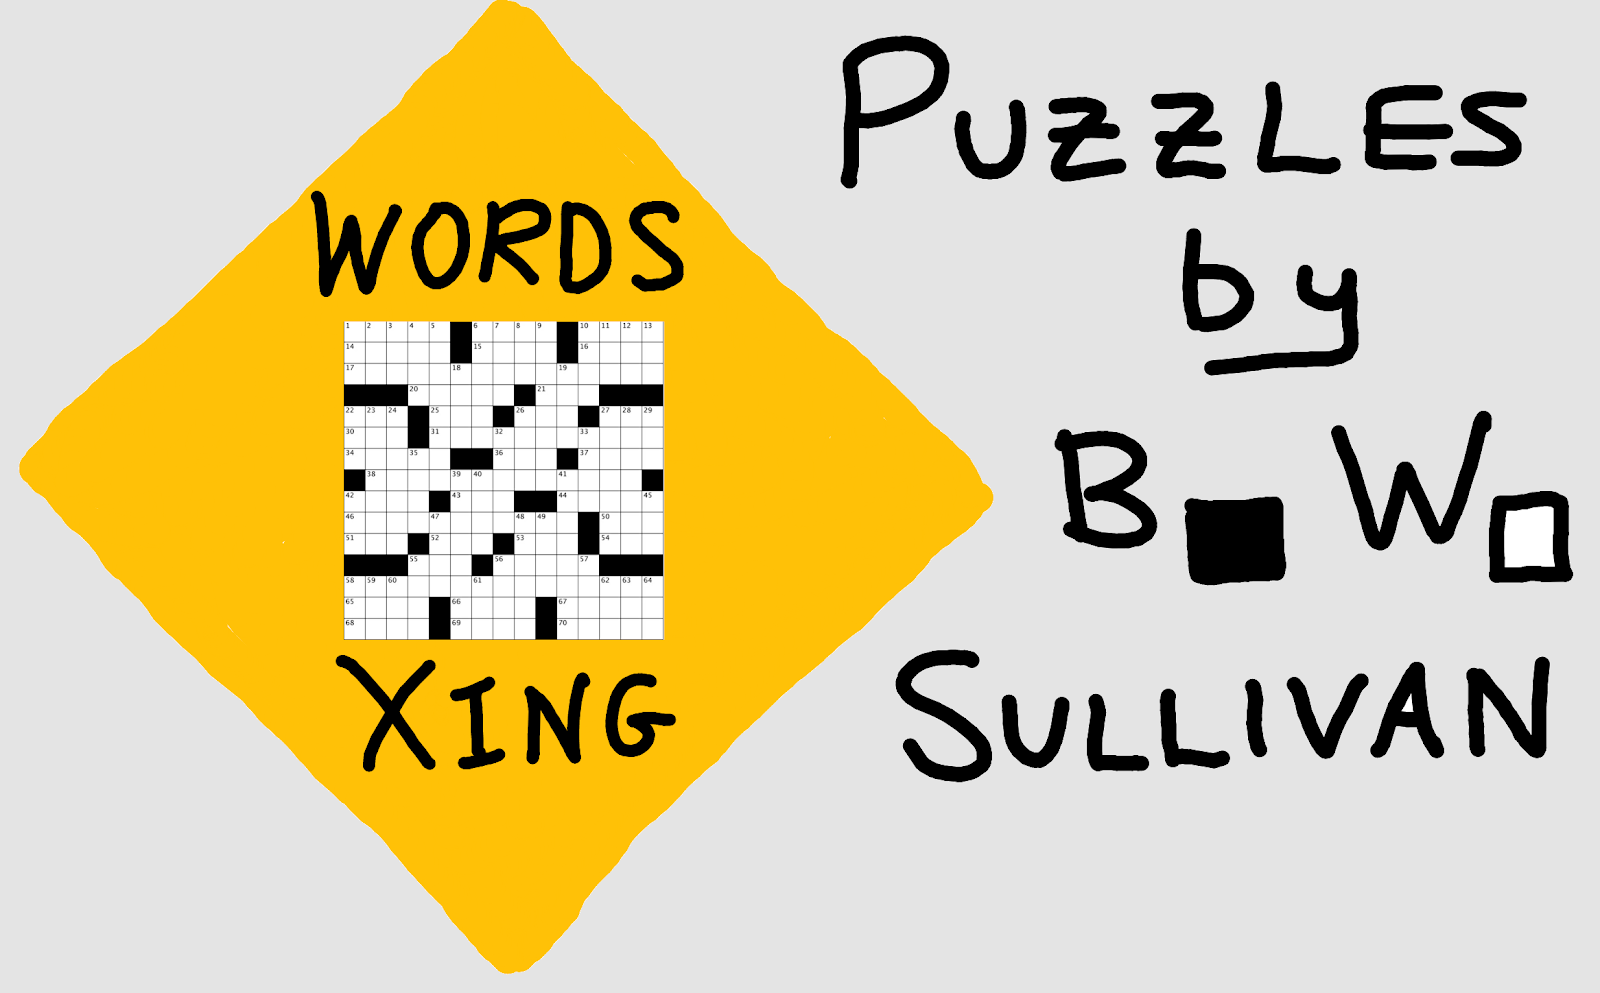 WORDS XING: Puzzles by BW Sullivan